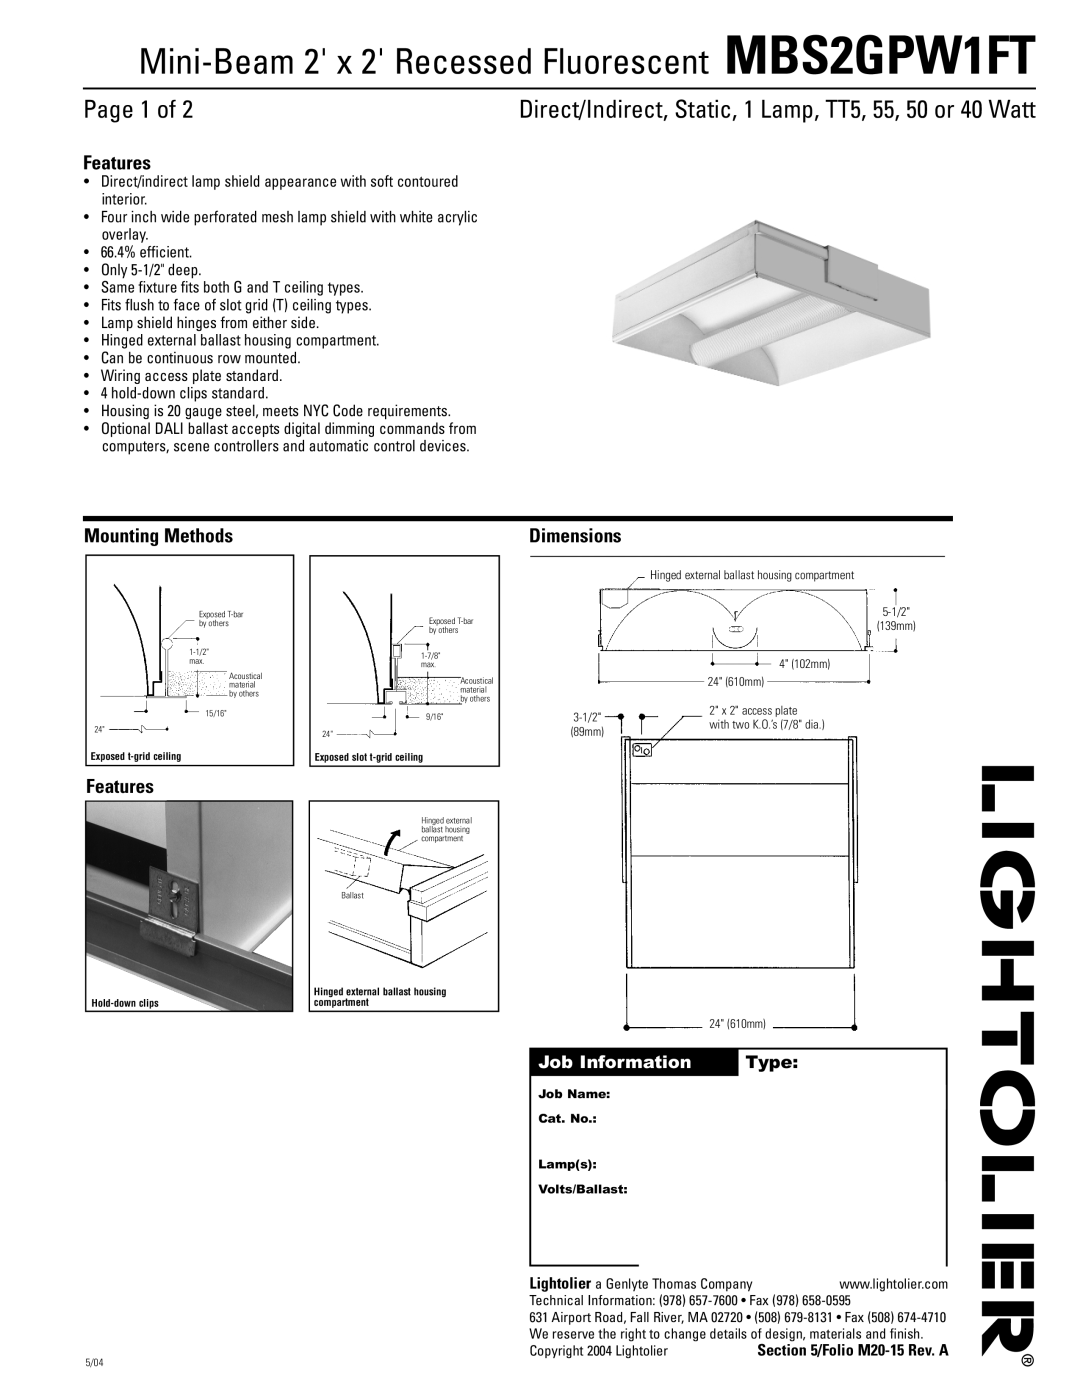 Lightolier MBS2GPW1FT dimensions Page 1 of, Features, Mounting Methods, Dimensions, Job Information Type 